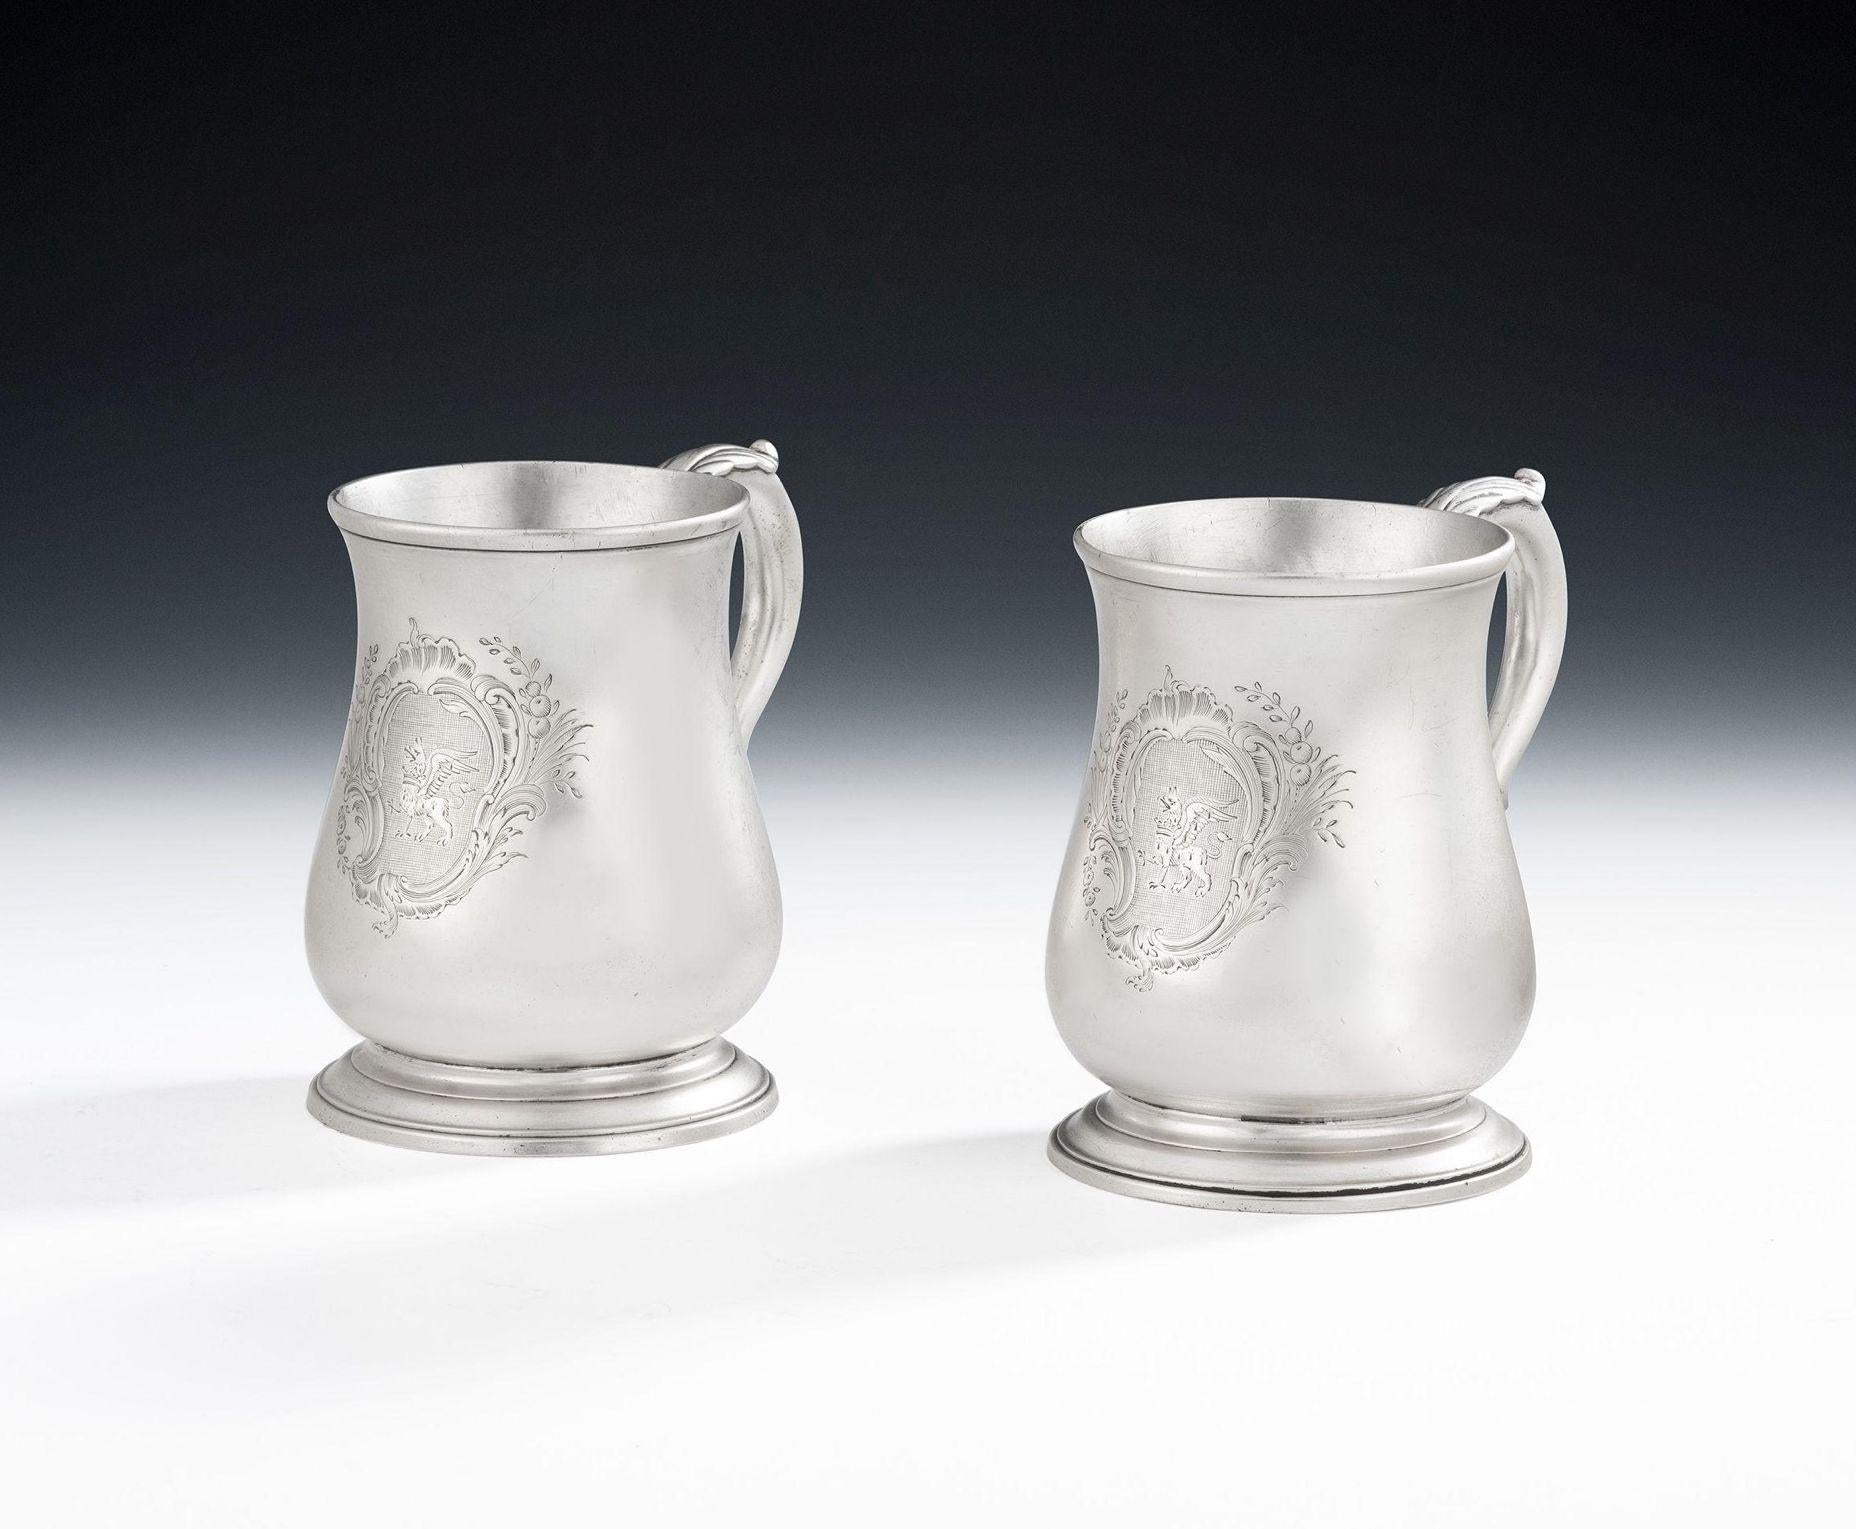 A Very Fine Pair of George II Half Pint Mugs Made in London in 1754 by Thomas Whipham.

The Mugs stand on a cast and applied spreading foot and display a baluster shaped body with slightly flared rim. The scroll handle is decoarted with leaf capping